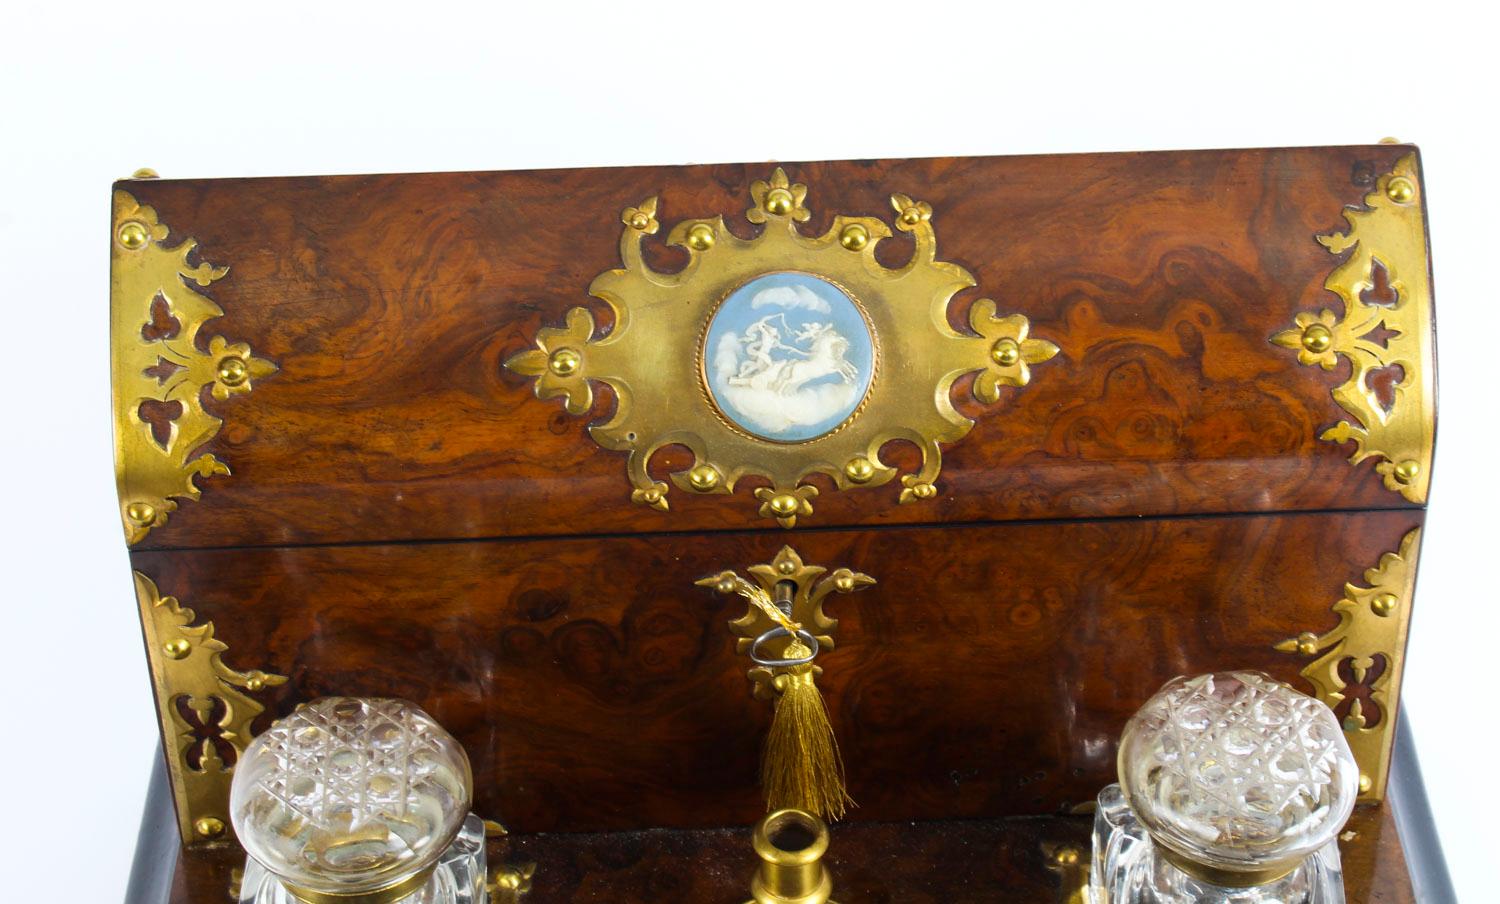 This is a fabulous antique Victorian burr walnut writing and stationery box of domed form with elaborate decorative brass mounts and Wedgwood plaque, circa 1860 in date.

The back with arched cover enclosing a paper and envelope holder with the